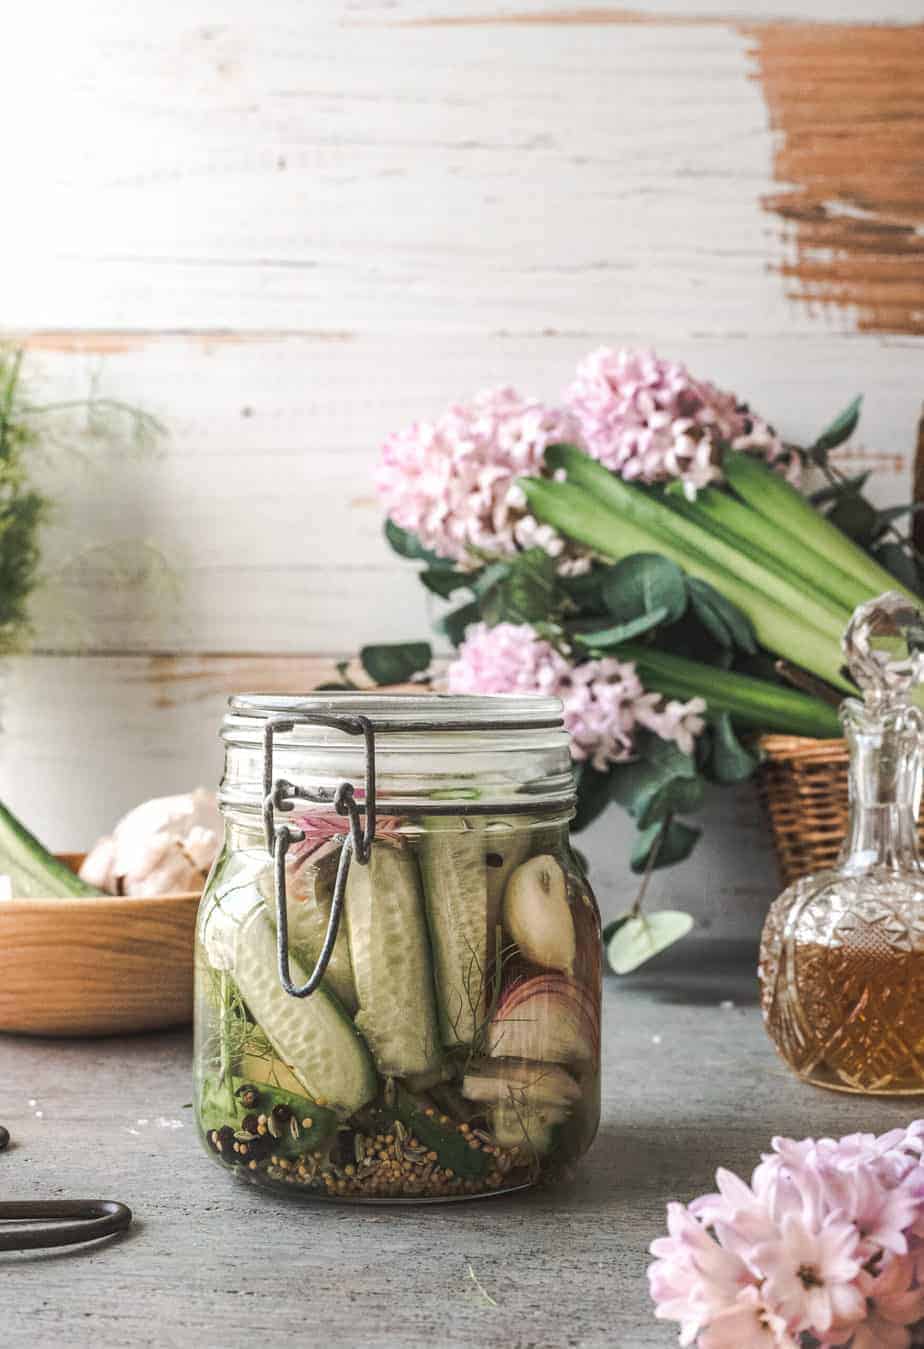 jar of homemade apple cider vinegar pickles - cucumbers with onions, garlic, seeds in a rustic table with apple cider vinegar in a decanter and lavender flowers in a basket in the background